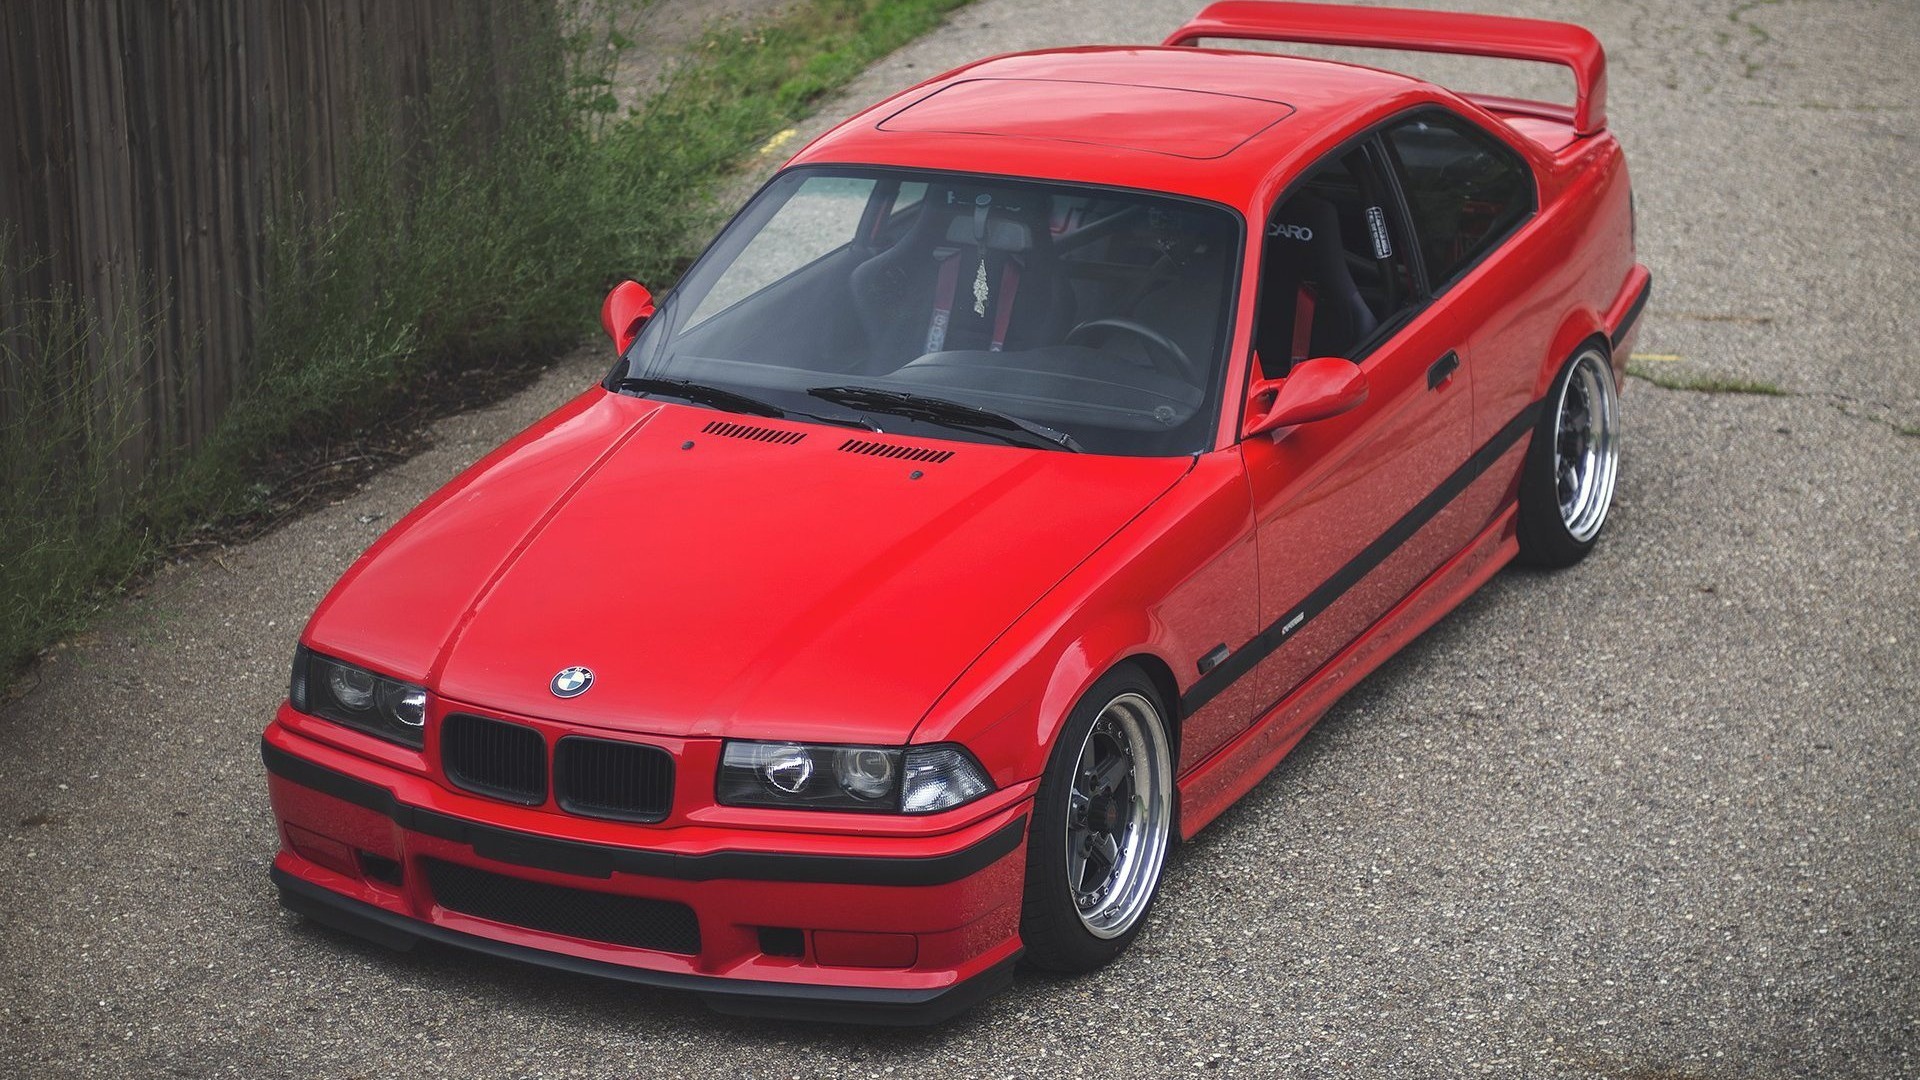 General 1920x1080 car vehicle BMW BMW E36 BMW 3 Series high angle red cars rear wing German cars grass